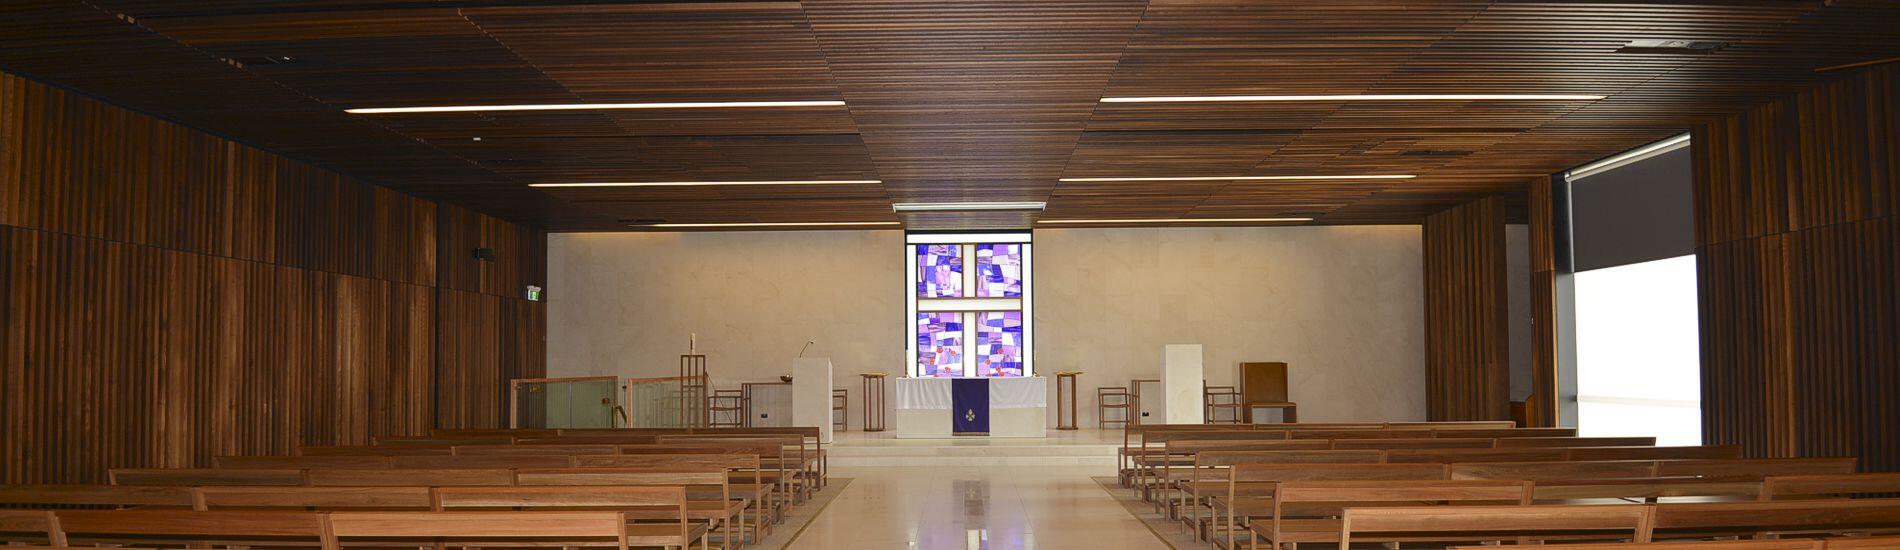 SUPASLAT Slatted Cambia Ash Wall and Ceiling Panels Create Transcendent Warmth Throughout Army Chapel